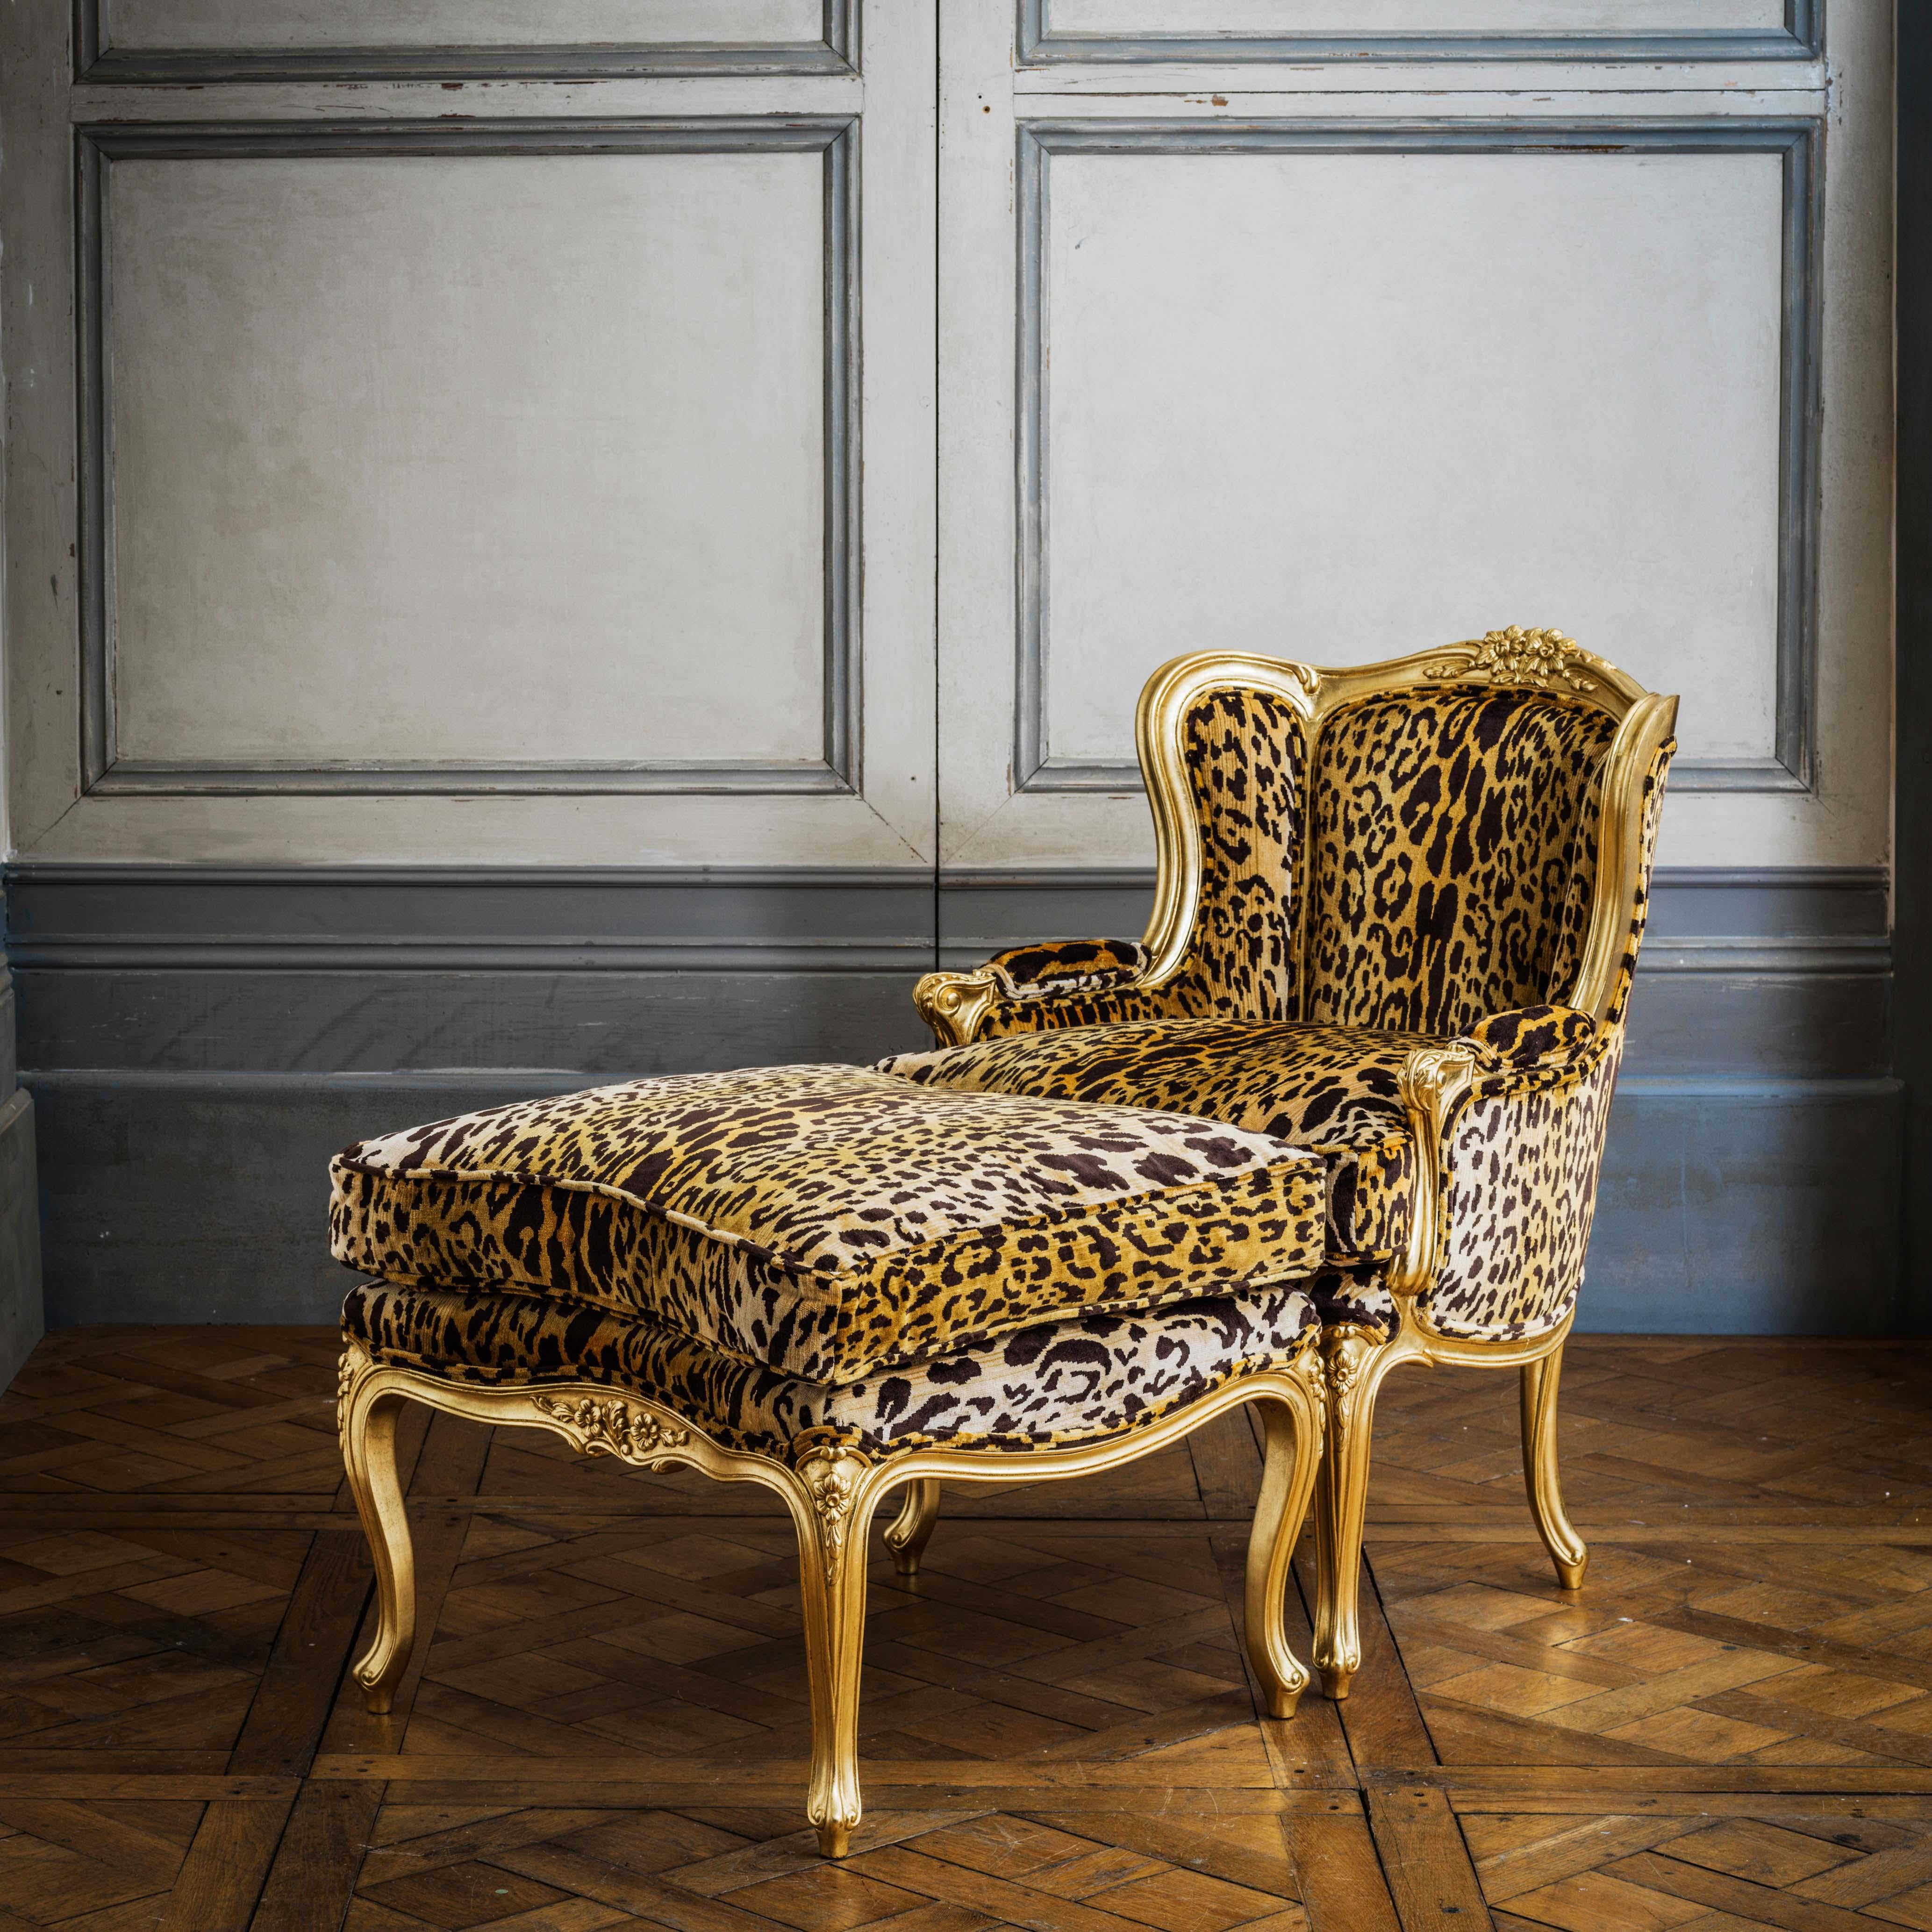 A Louis XV Duchesse Brissée that keeps on giving as it can also be used as a chaise longue or pair of chairs. Hand carved and hand finished to order. This piece has been upholstered in house in a bold leopard print for a statement look. Fabric not